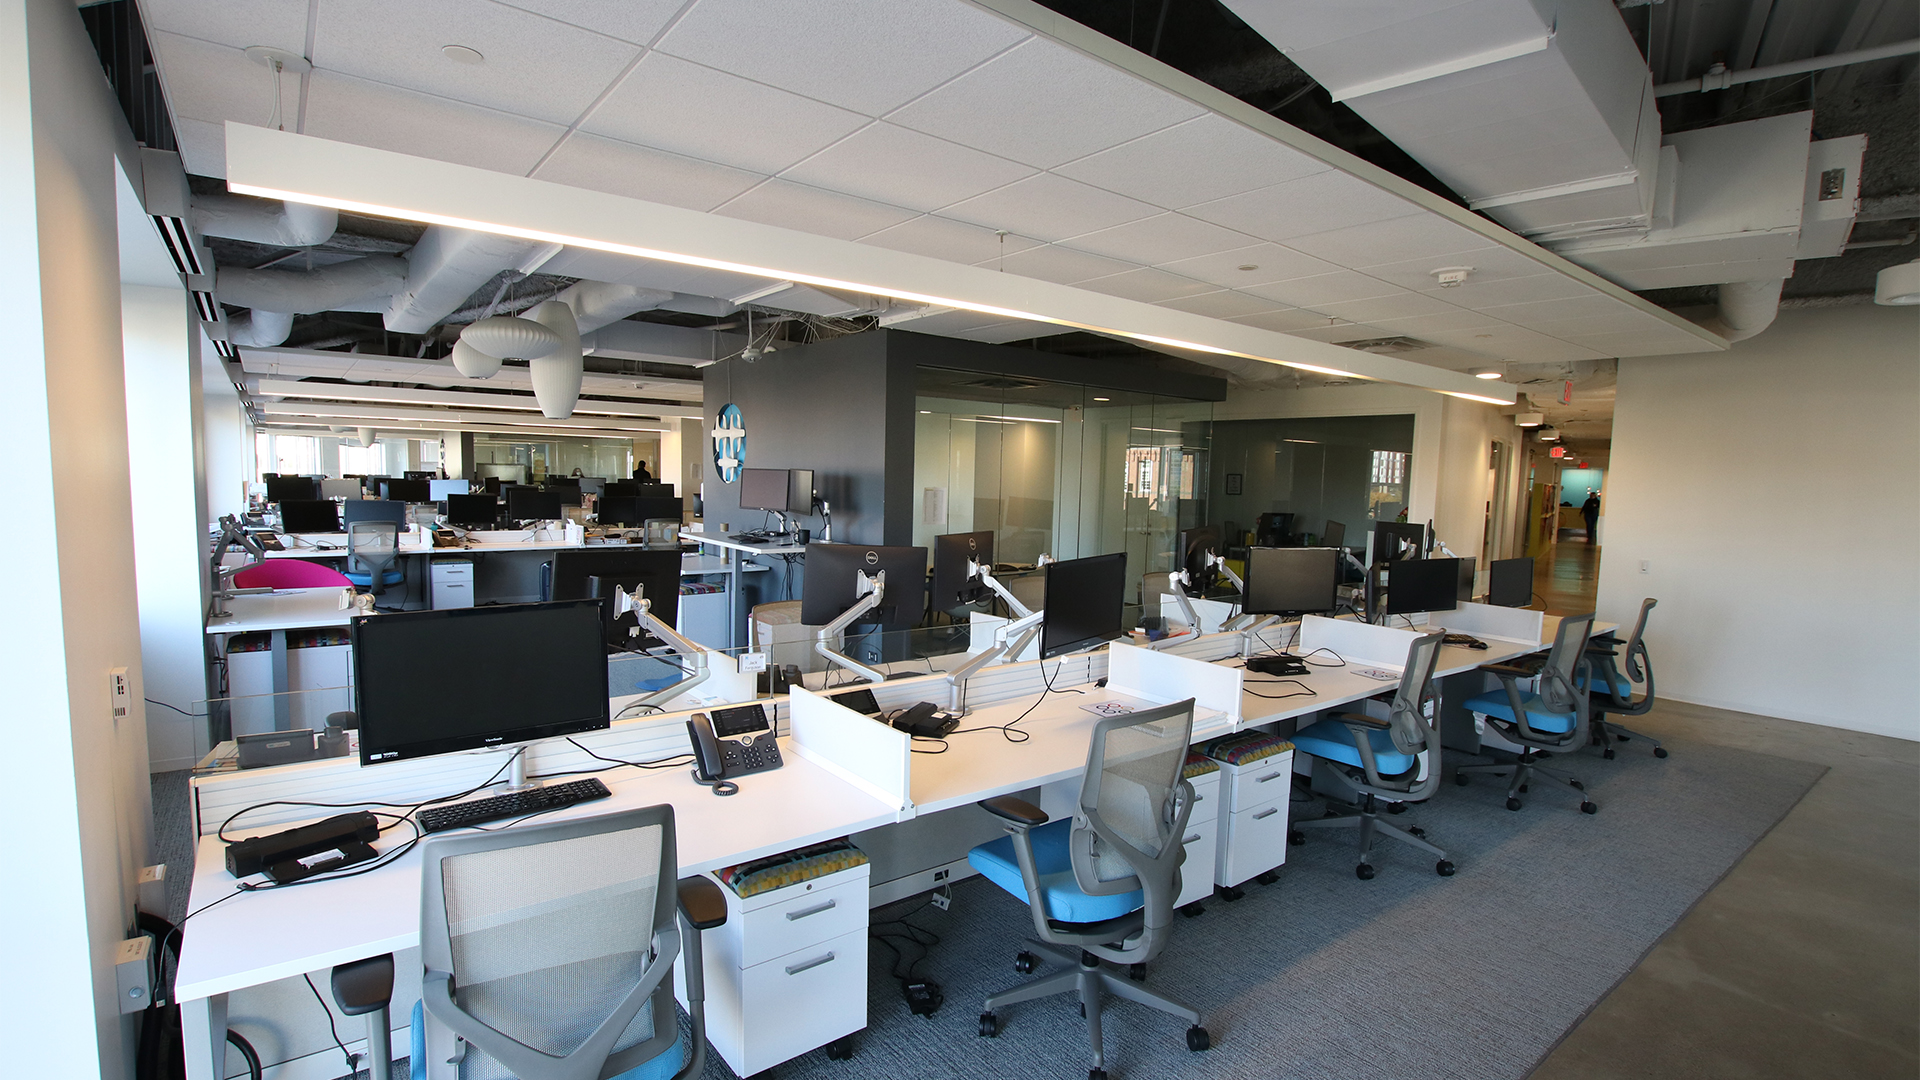 601 New Jersey Ave NW workstations